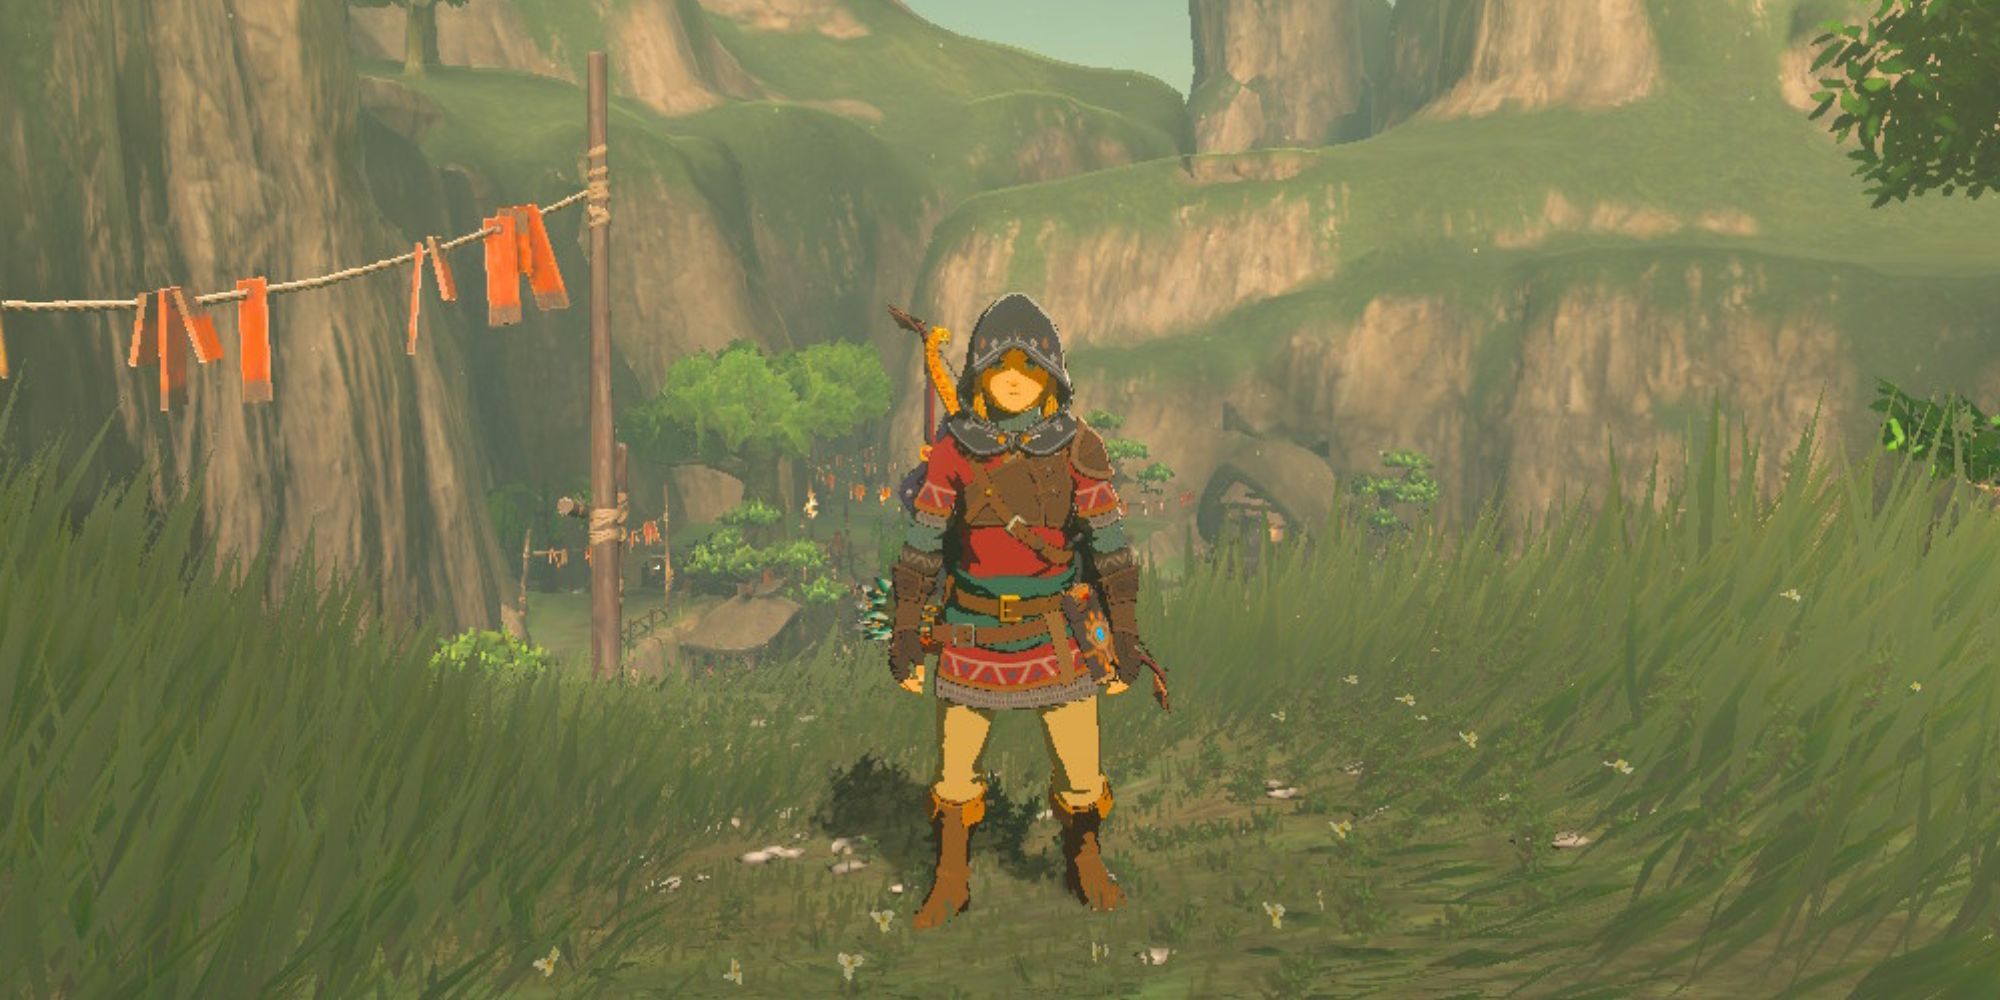 Link stands by some tall grass while wearing the Hylian Set